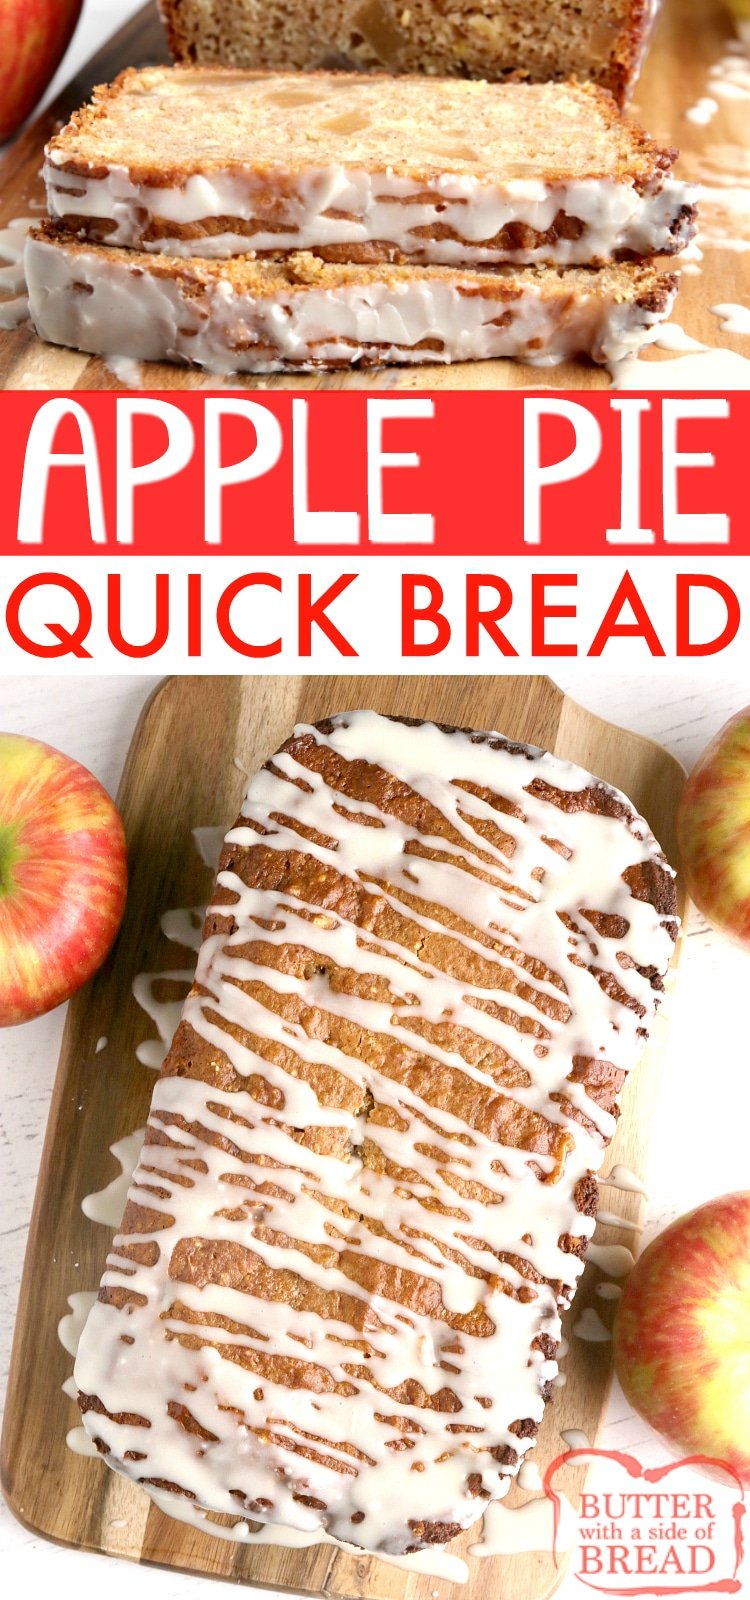 Apple Pie Quick Bread is made with a cake mix, apple pie filling and then topped with a simple maple glaze. This easy quick bread recipe tastes just like apple pie!